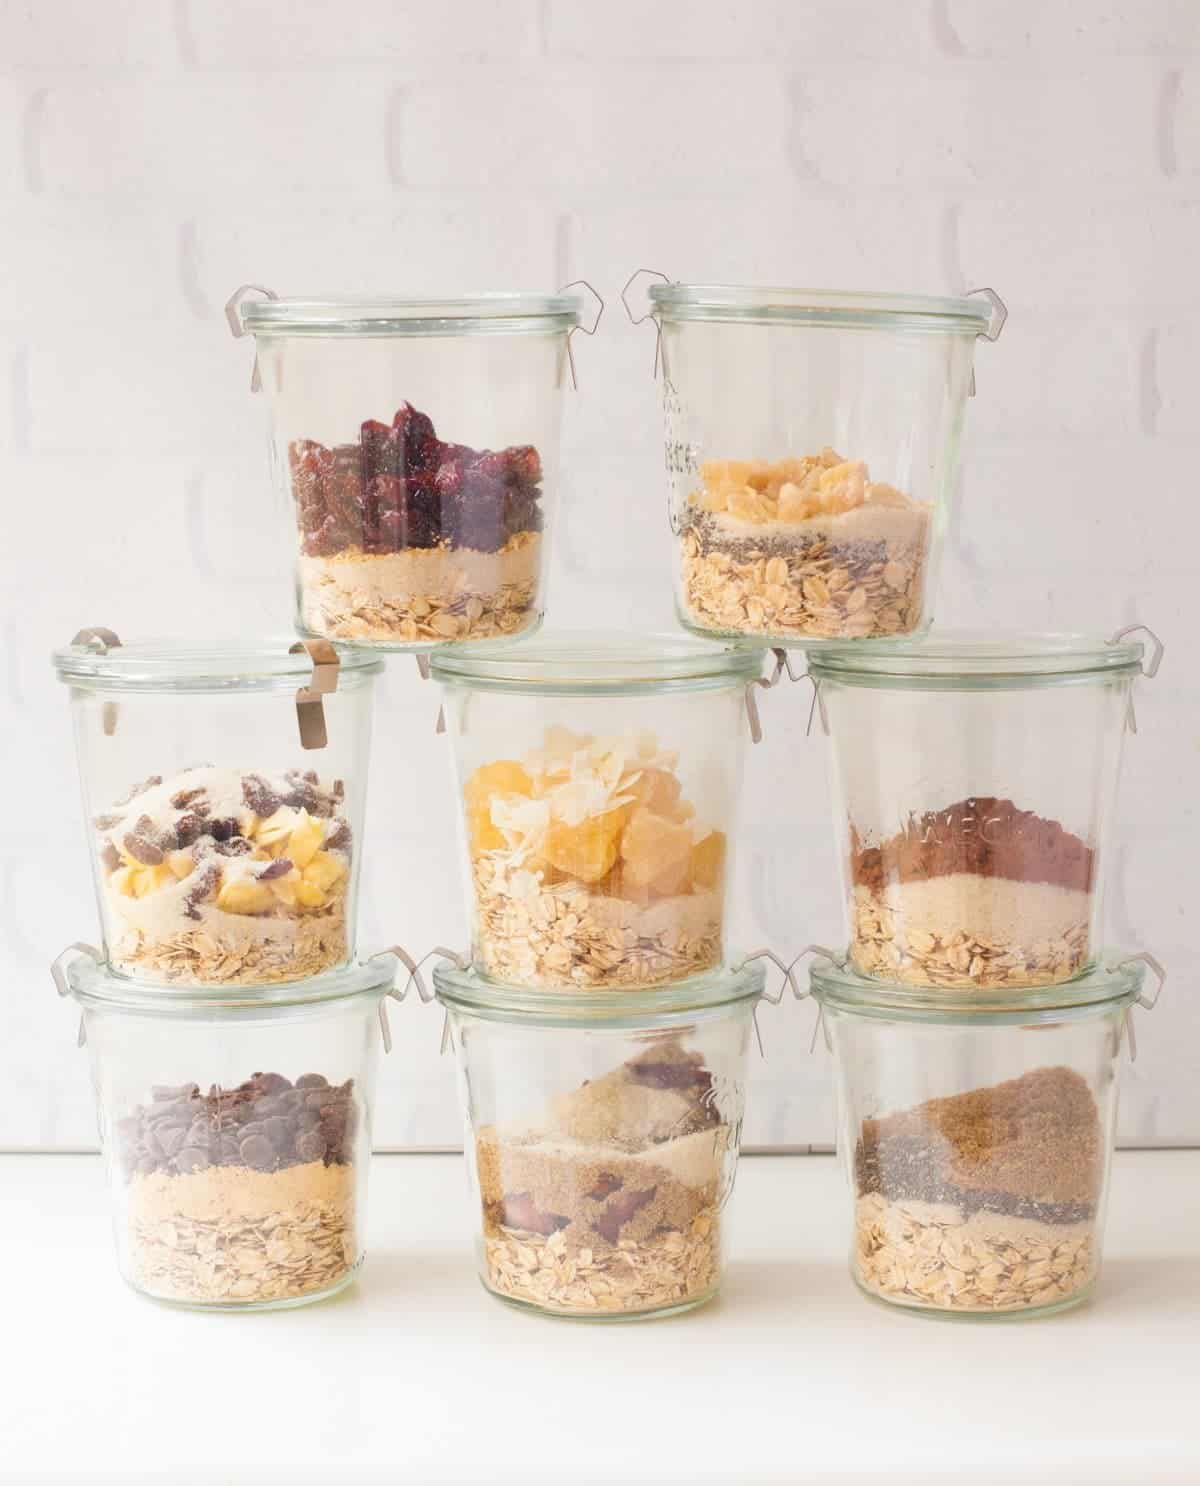 8 Healthy Instant Oatmeal Cups You Can Make at Home